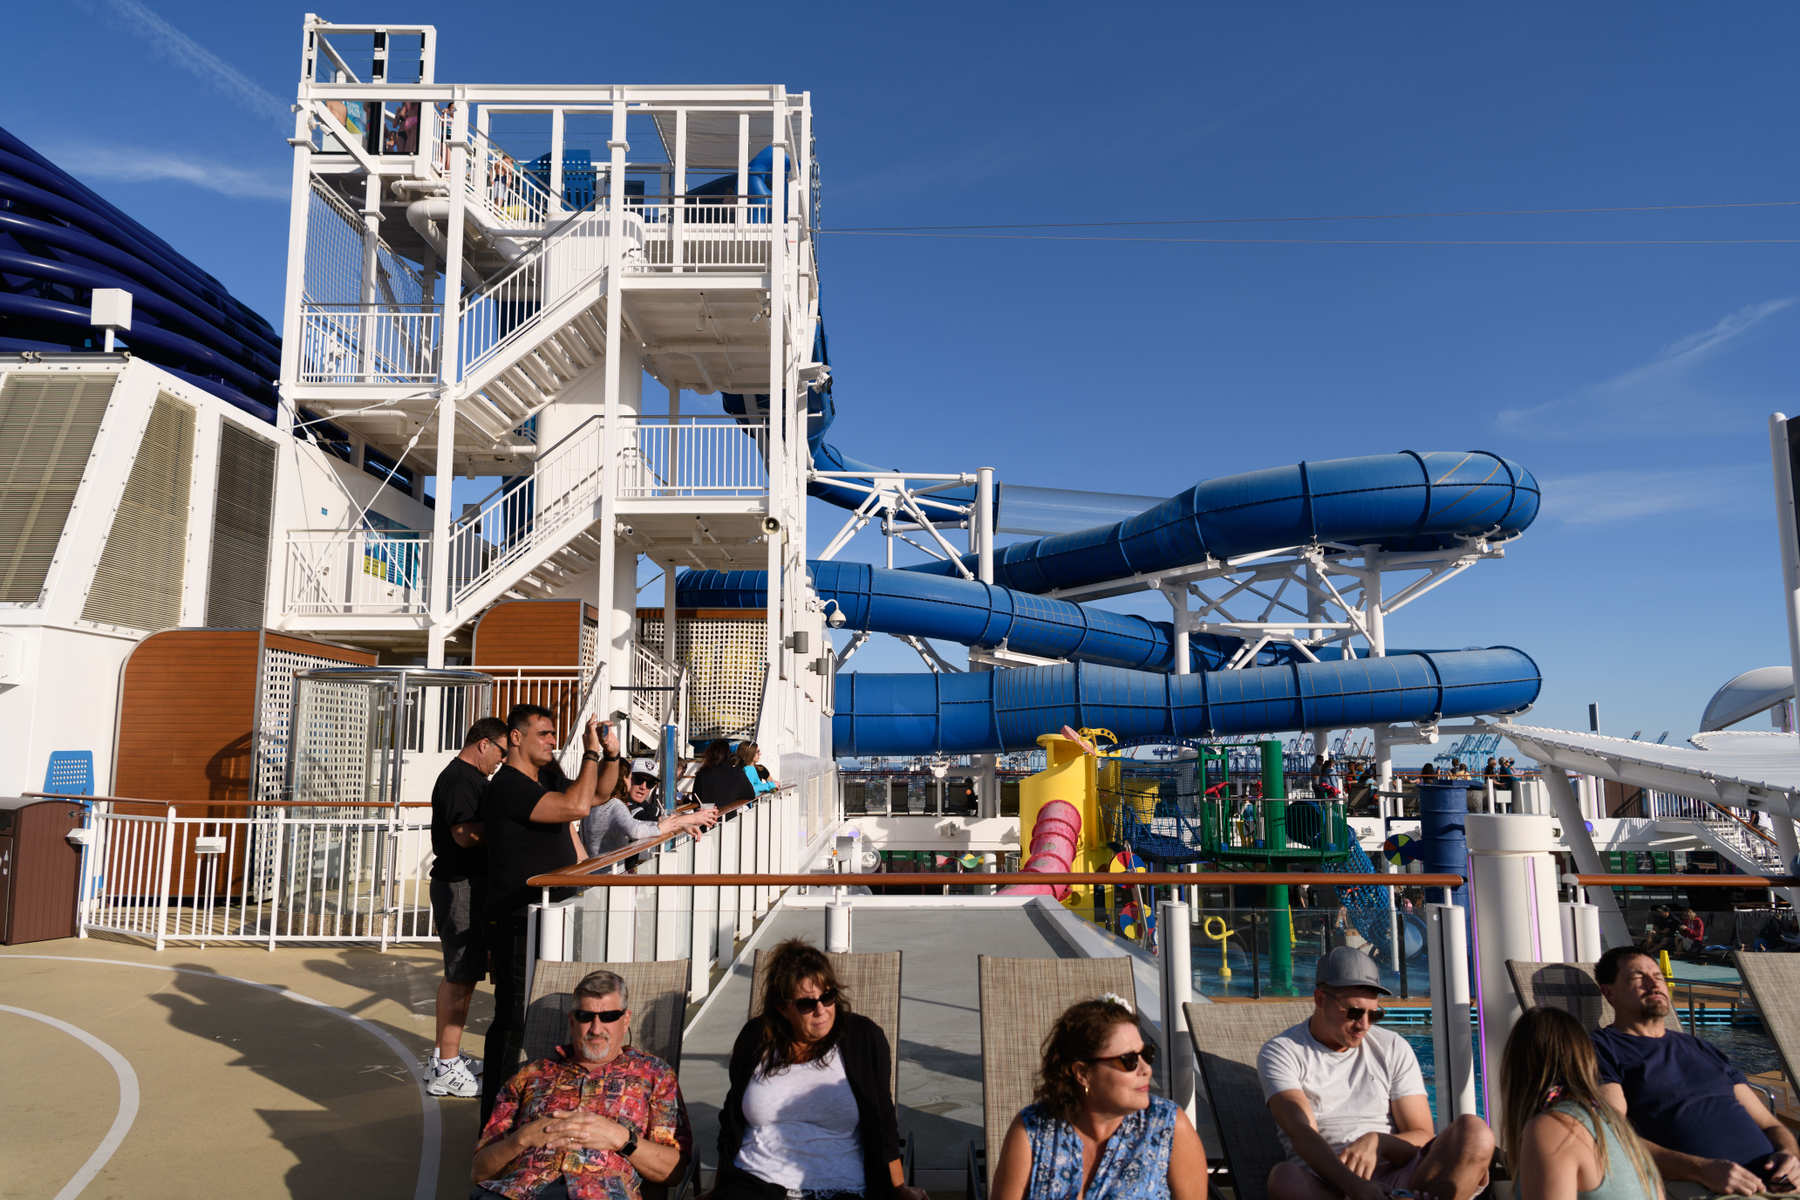 March 8, 2020People were sliding down this water slide, until COVID restrictions shut it down.